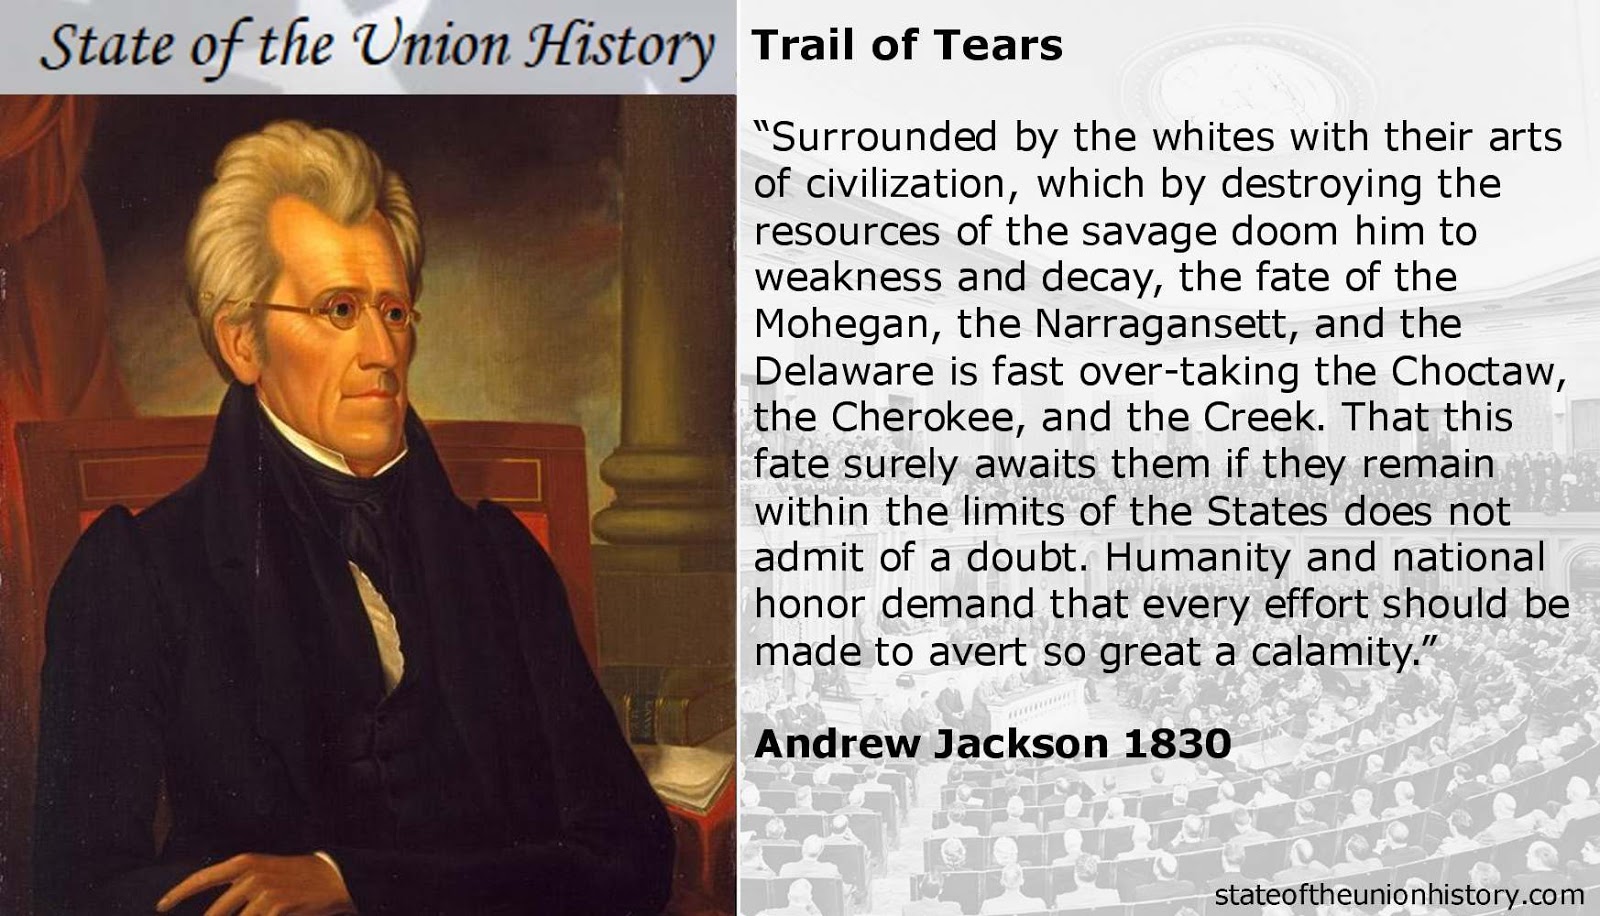 1829 Andrew Jackson - Trail of Tears | State of the Union History